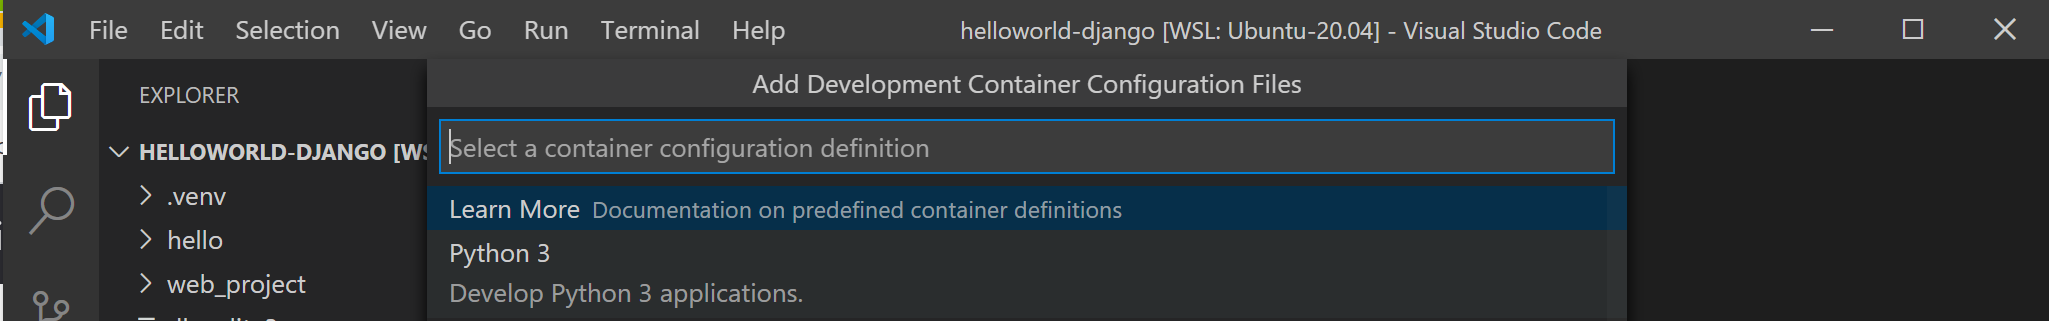 VS Code Dev Containers config definitions